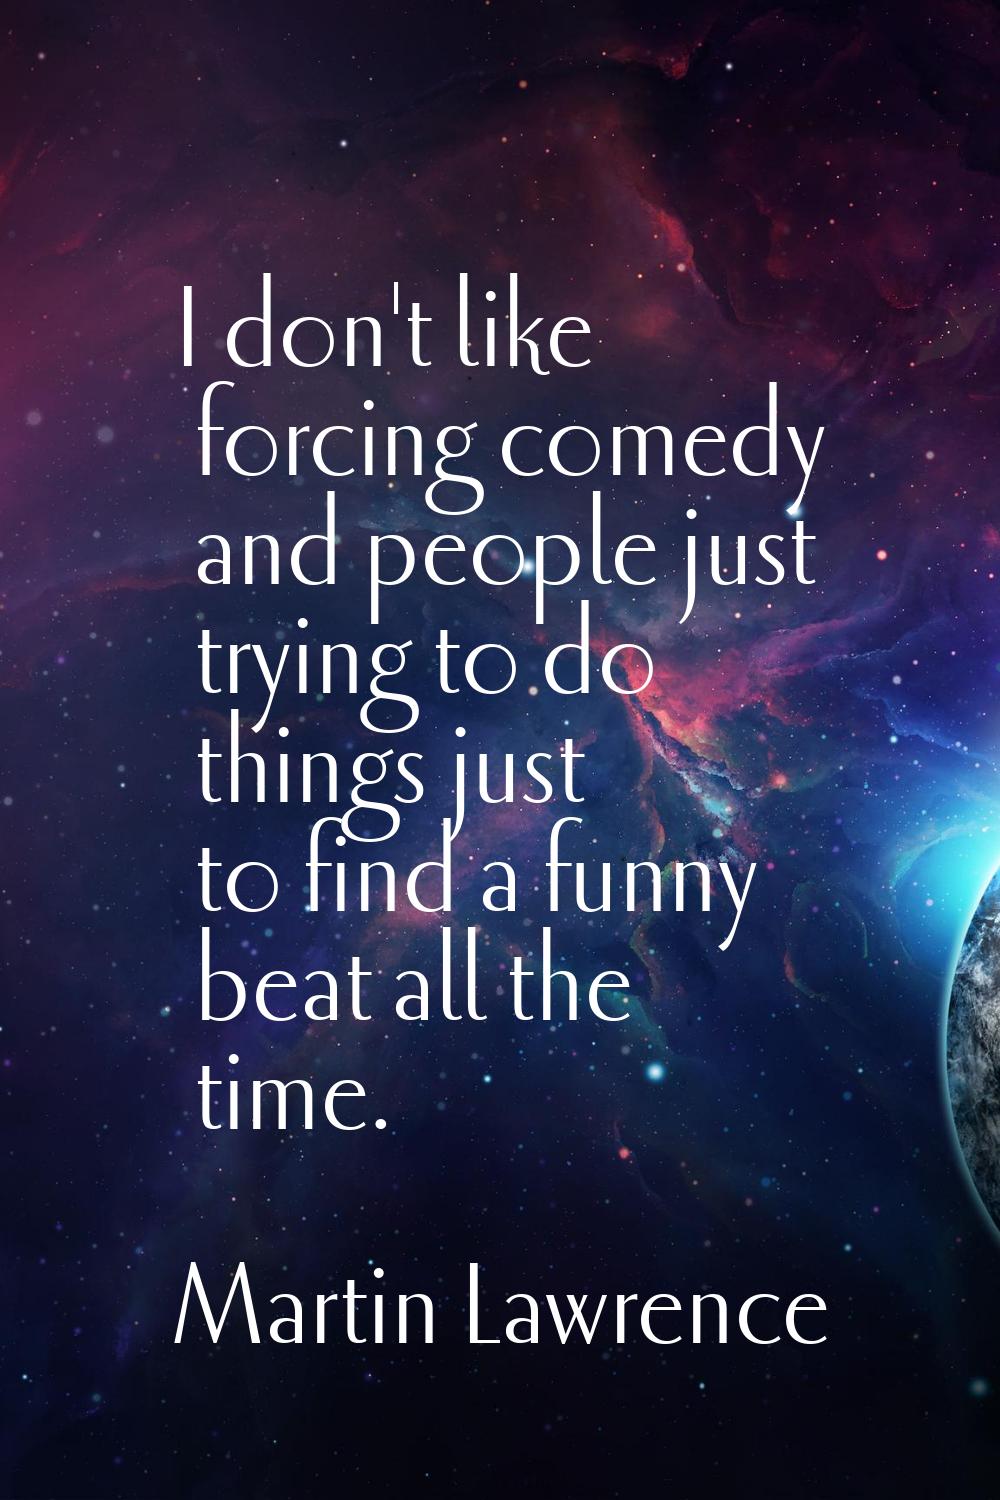 I don't like forcing comedy and people just trying to do things just to find a funny beat all the t